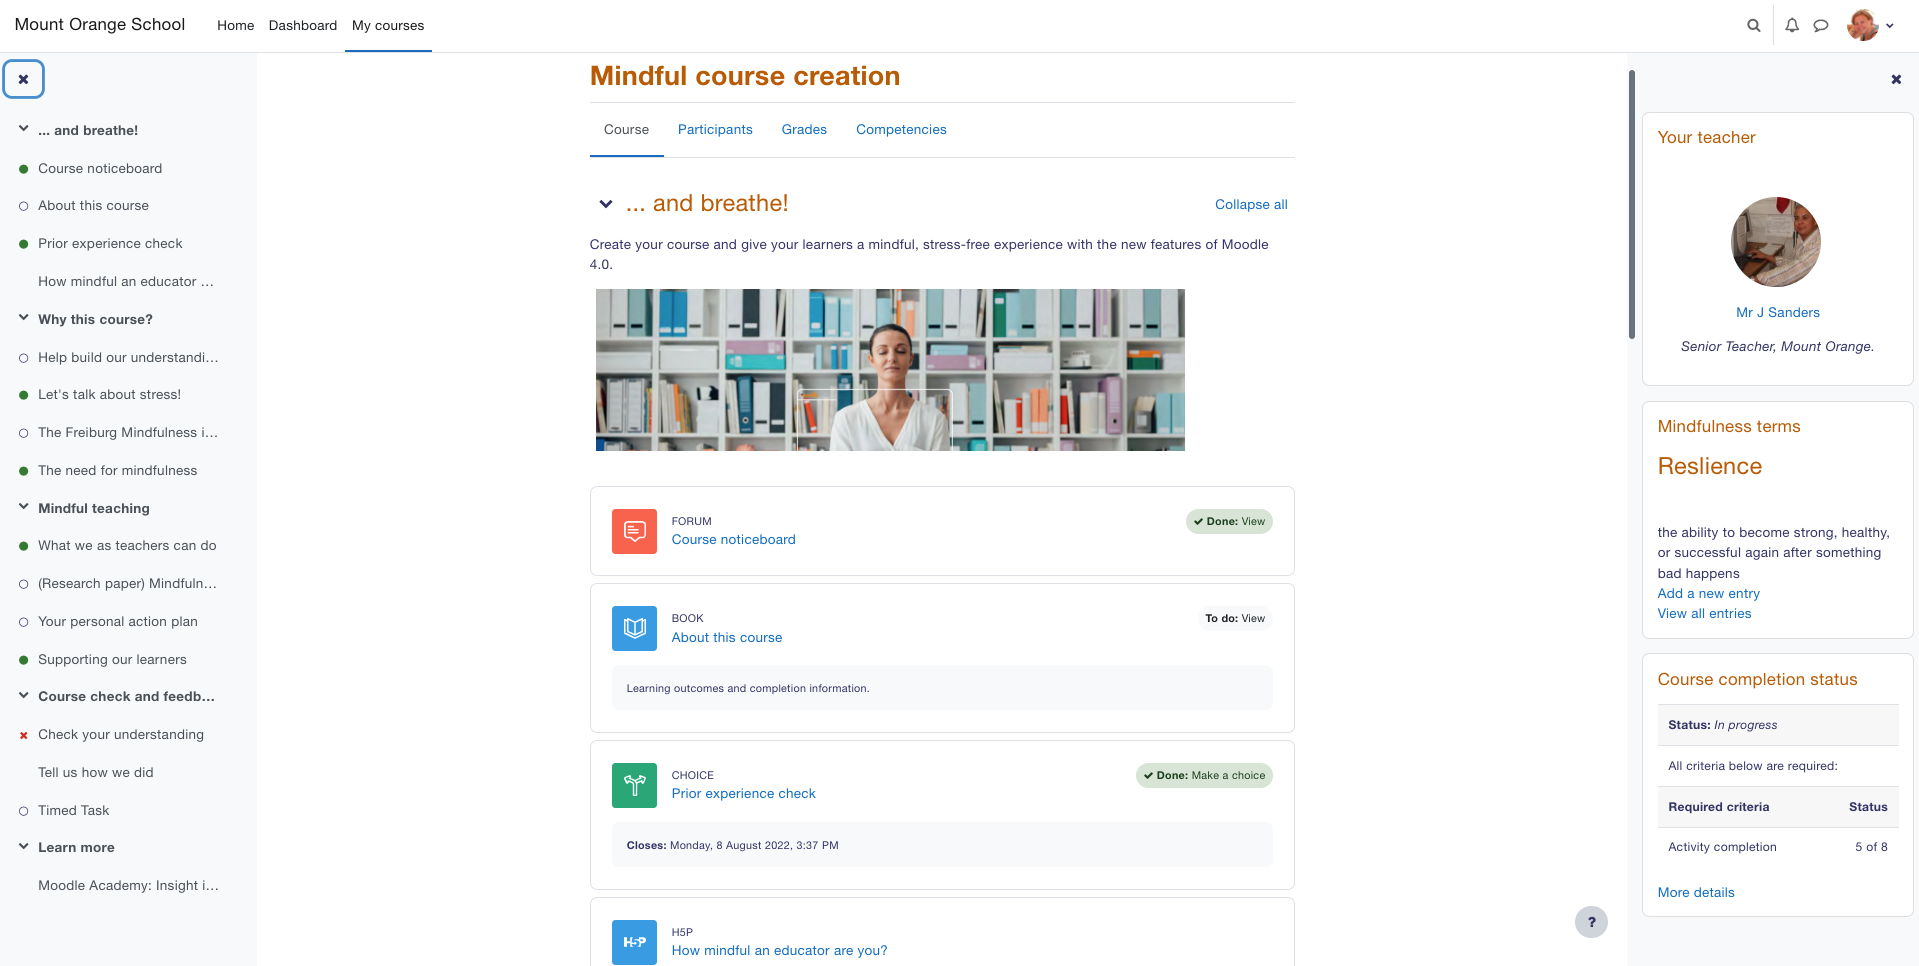 Moodle LMS Software - Inside course view